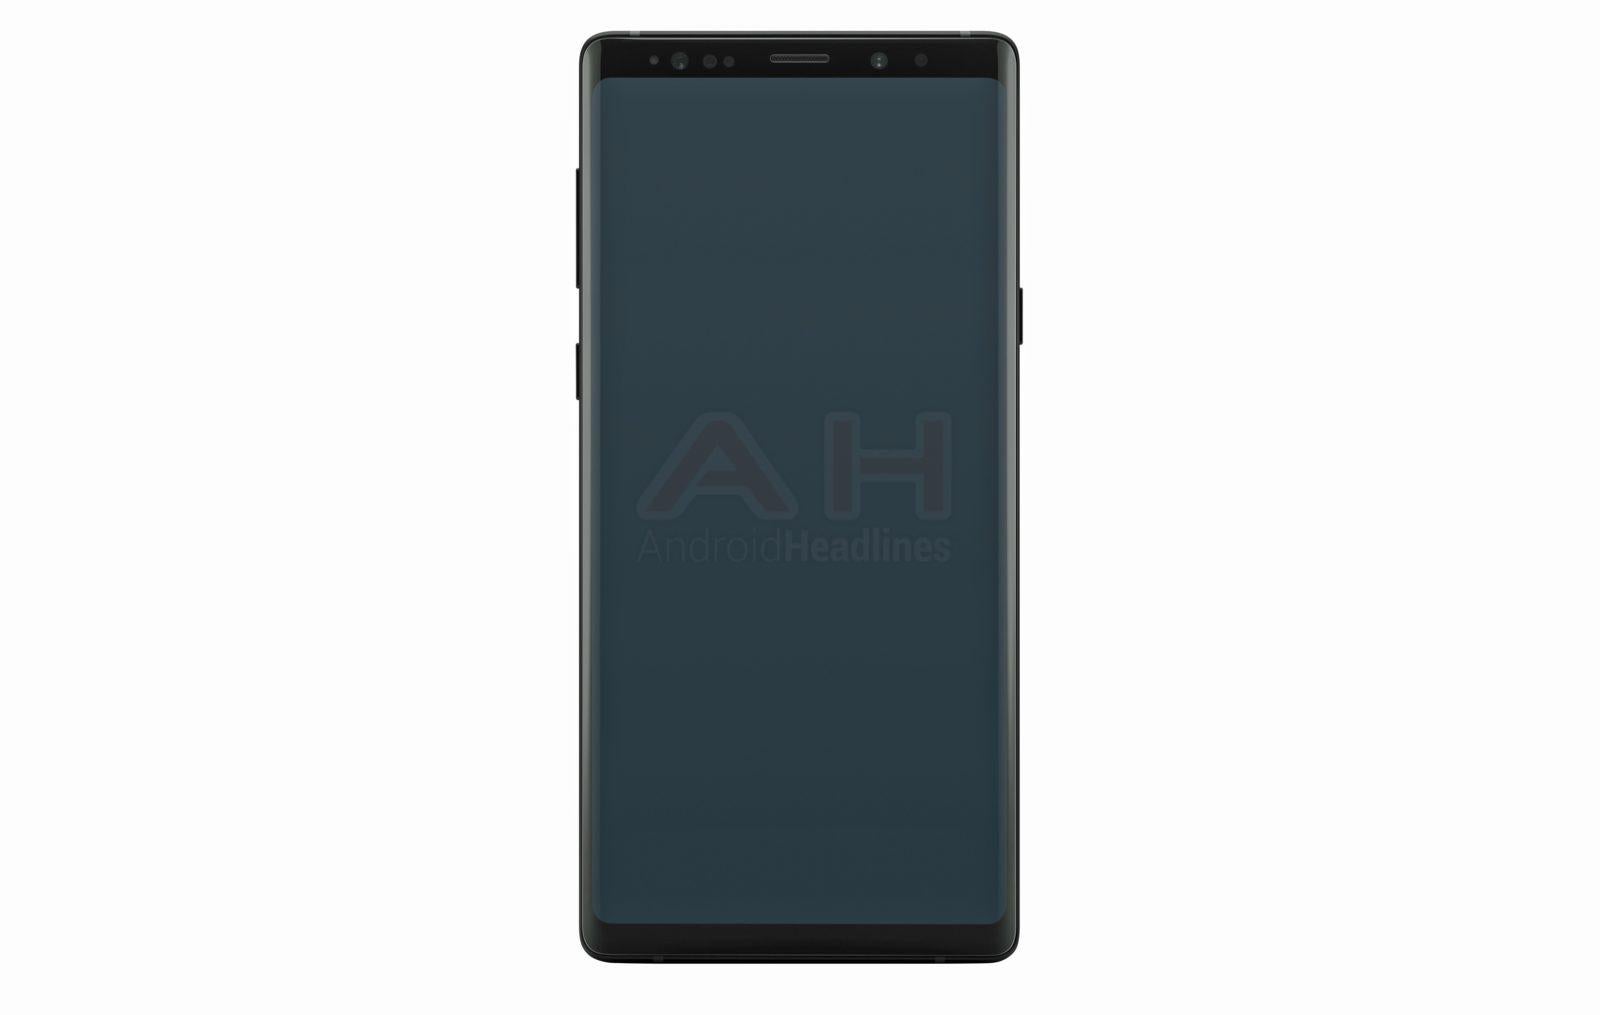 Is this the Samsung Galaxy Note 9? It looks almost identical to the Galaxy Note 8 but should feature much-improved specs